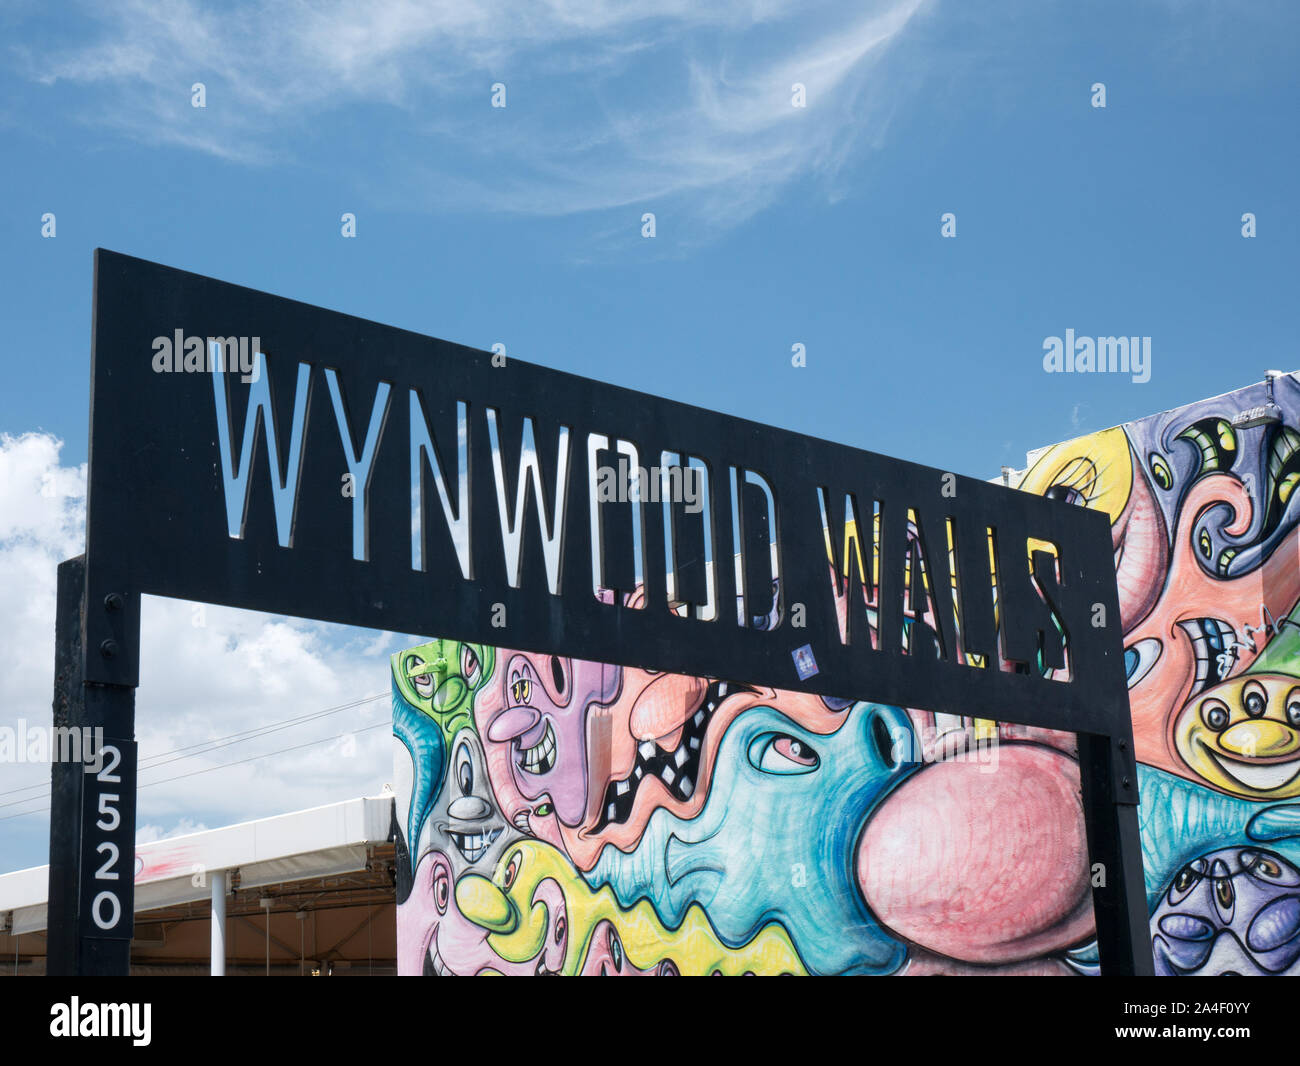 Miami, Florida, USA. August 2019. Art Murals at Wynwood. Wynwood is a neighborhood in Miami Florida which has a strong art culture presence and murals Stock Photo